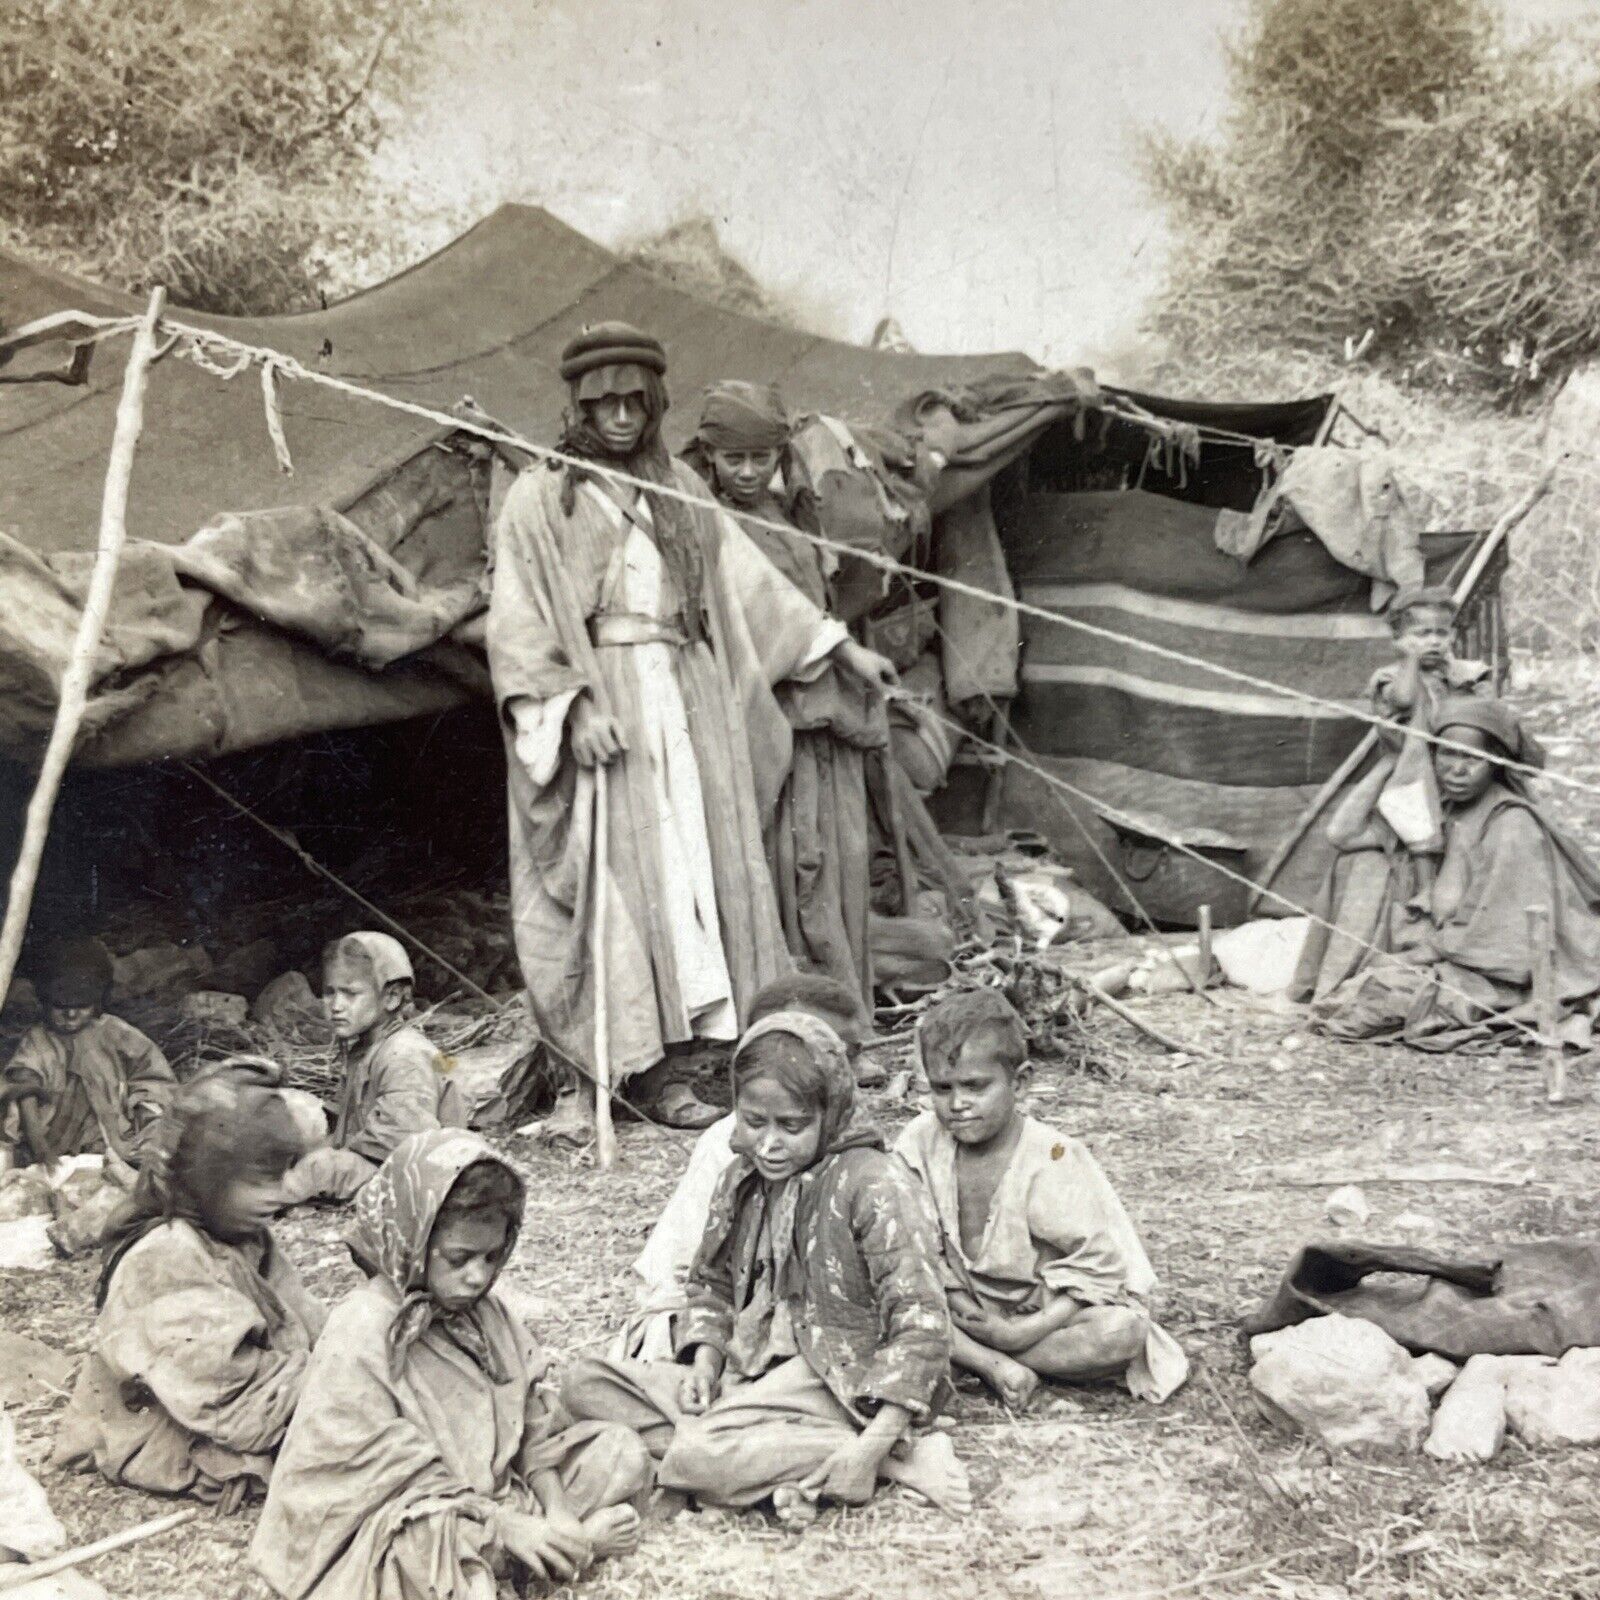 Antique 1909 Bedouin Nomads In Palestine Stereoview Photo Card V3319